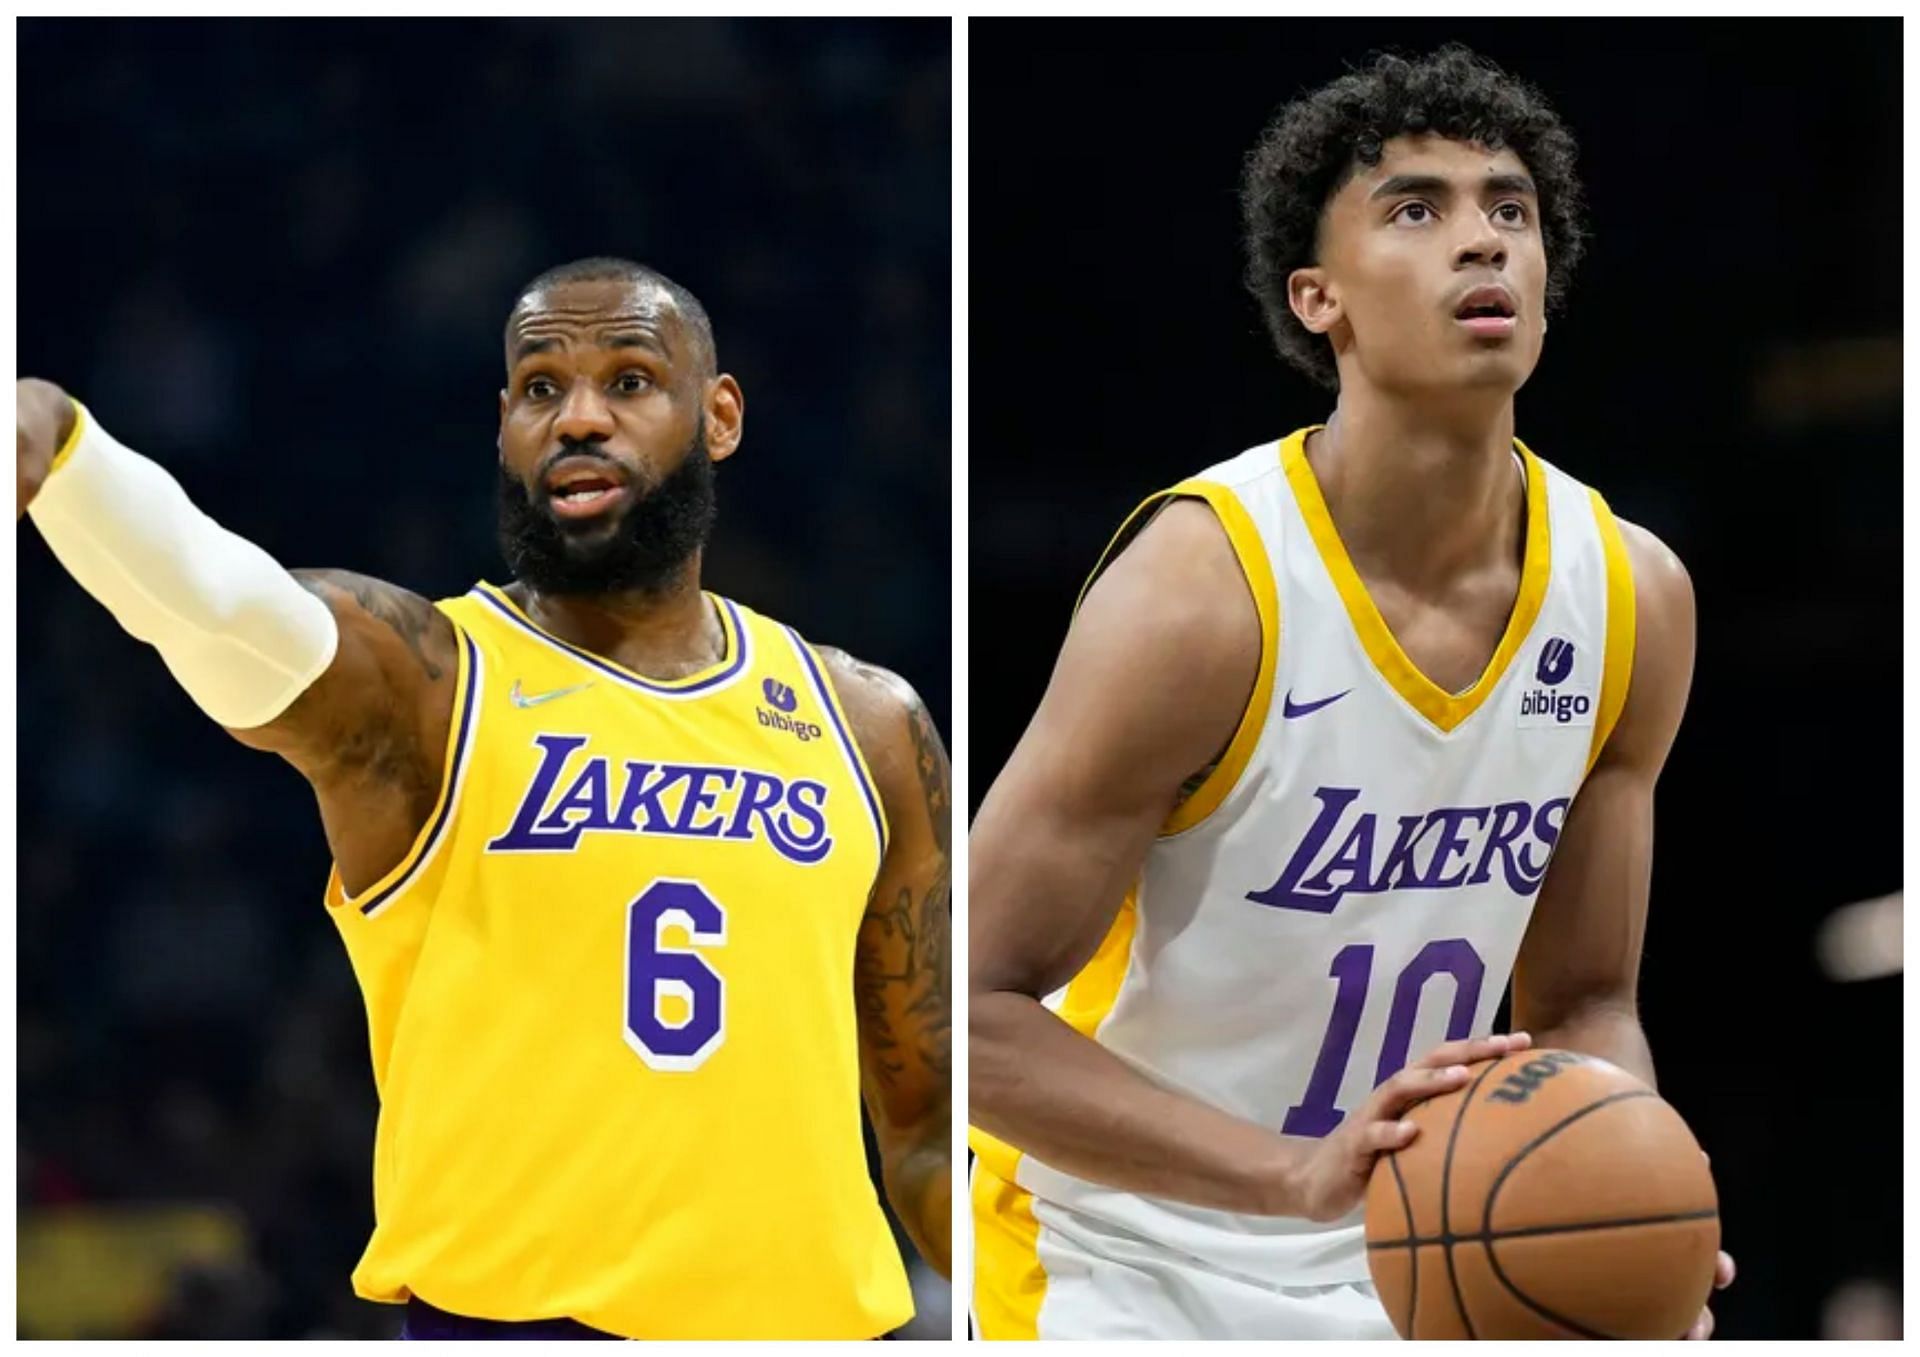 LeBron James is mentoring his Lakers